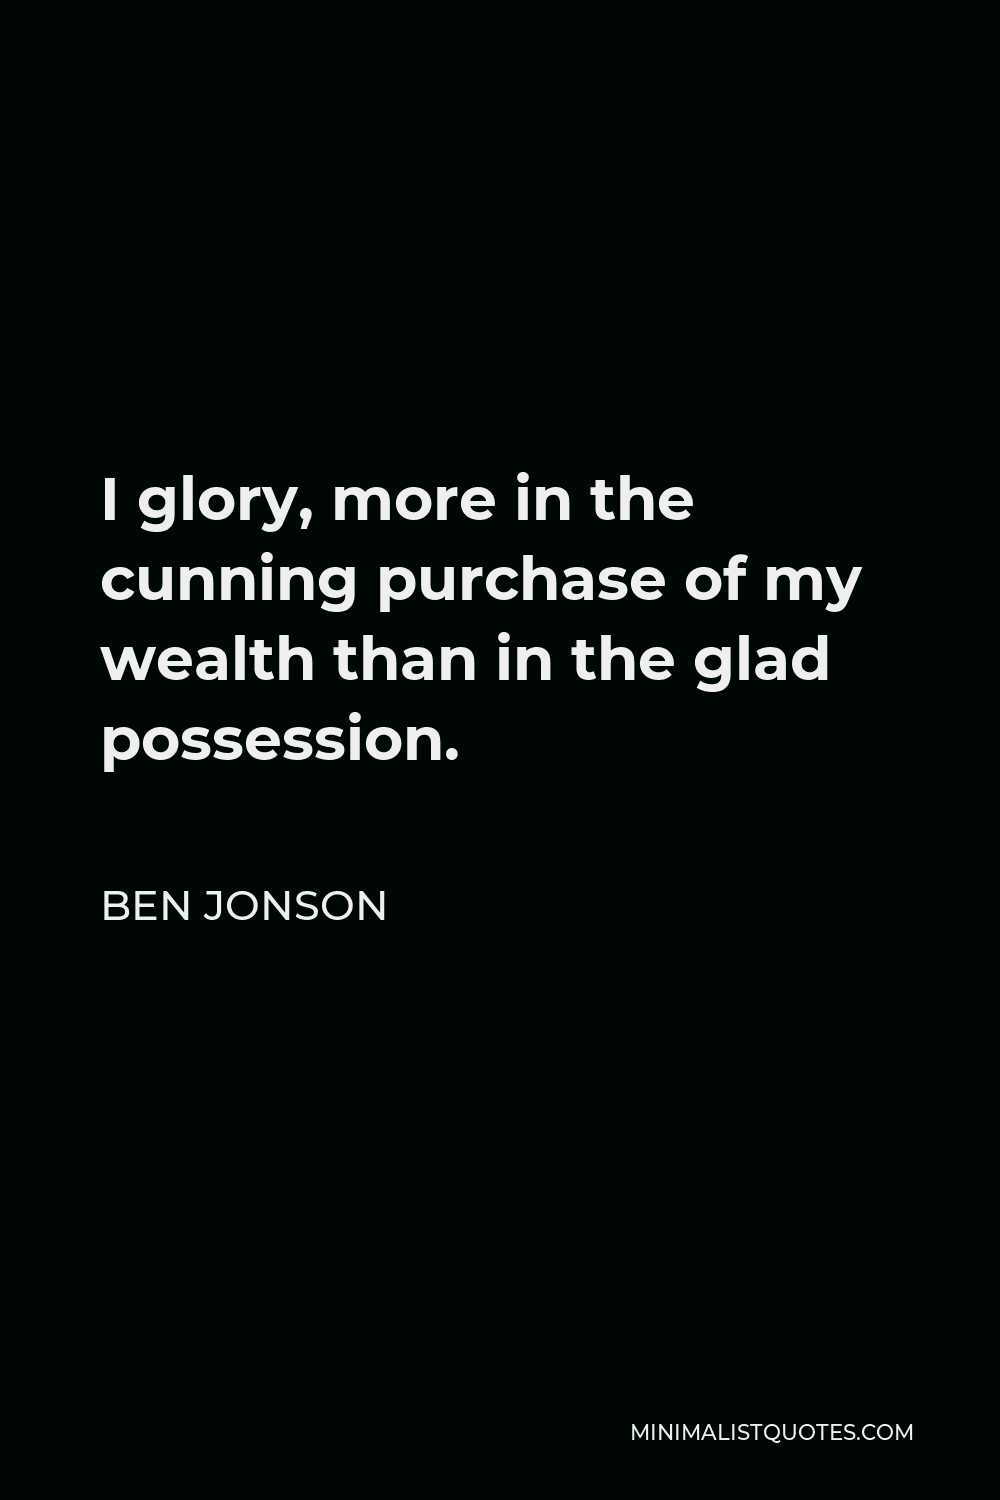 Ben Jonson Quote - I glory, more in the cunning purchase of my wealth than in the glad possession.